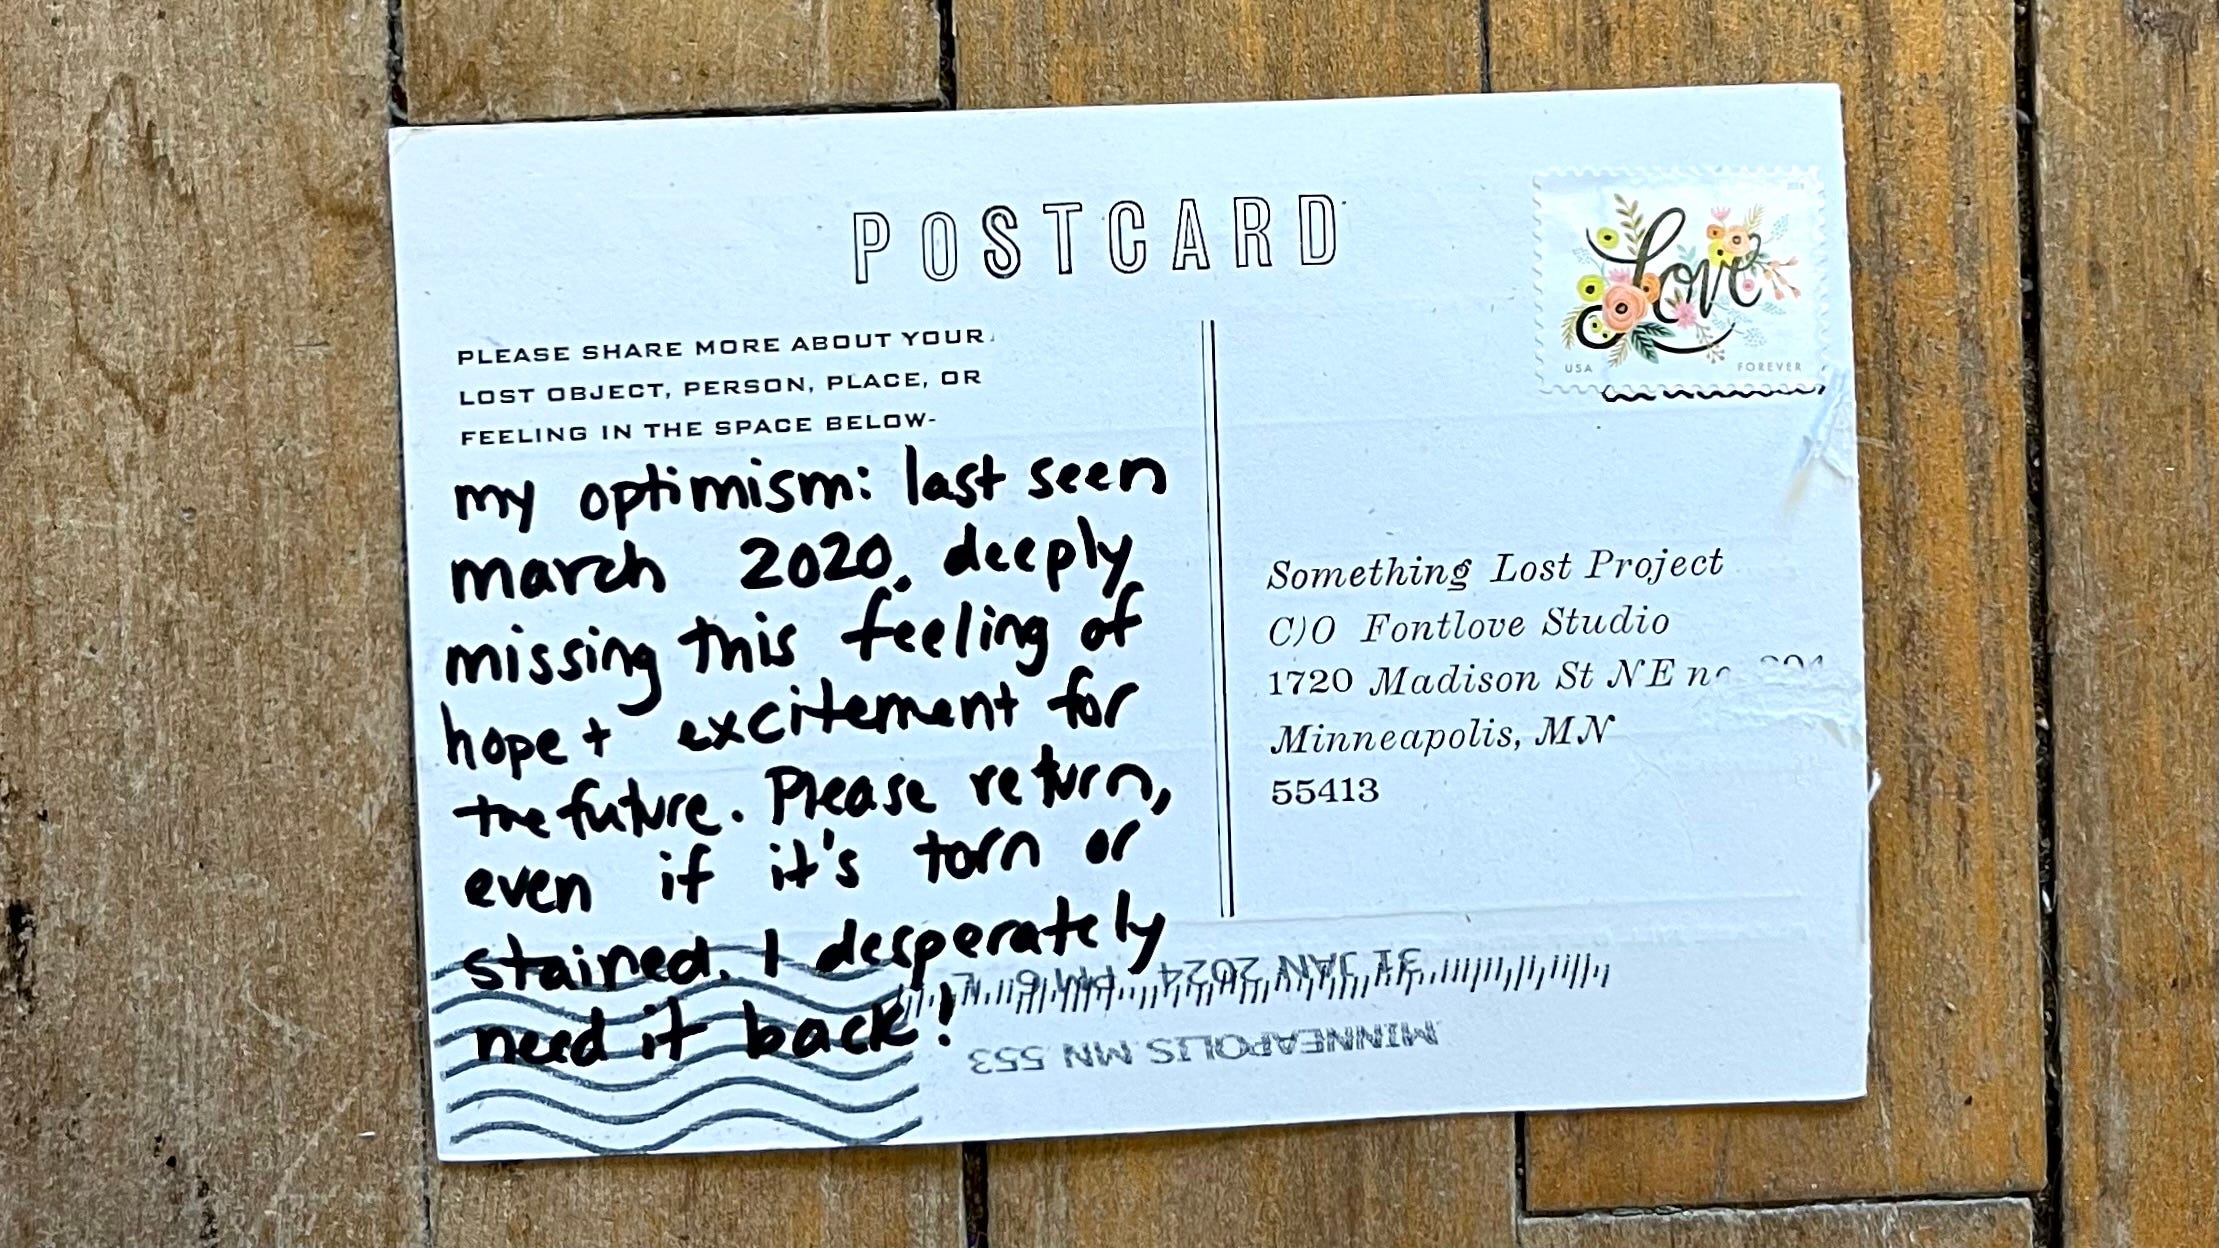 The back of the postcard. The left side says "Please share more about your lost object, person, place or feeling in the space below:" and it says in handwriting "my optimism: last seen march 2020, deeply missing this feeling of hope + excitement for the future. Please return, even if it's torn or stained. I desperately need it back!"